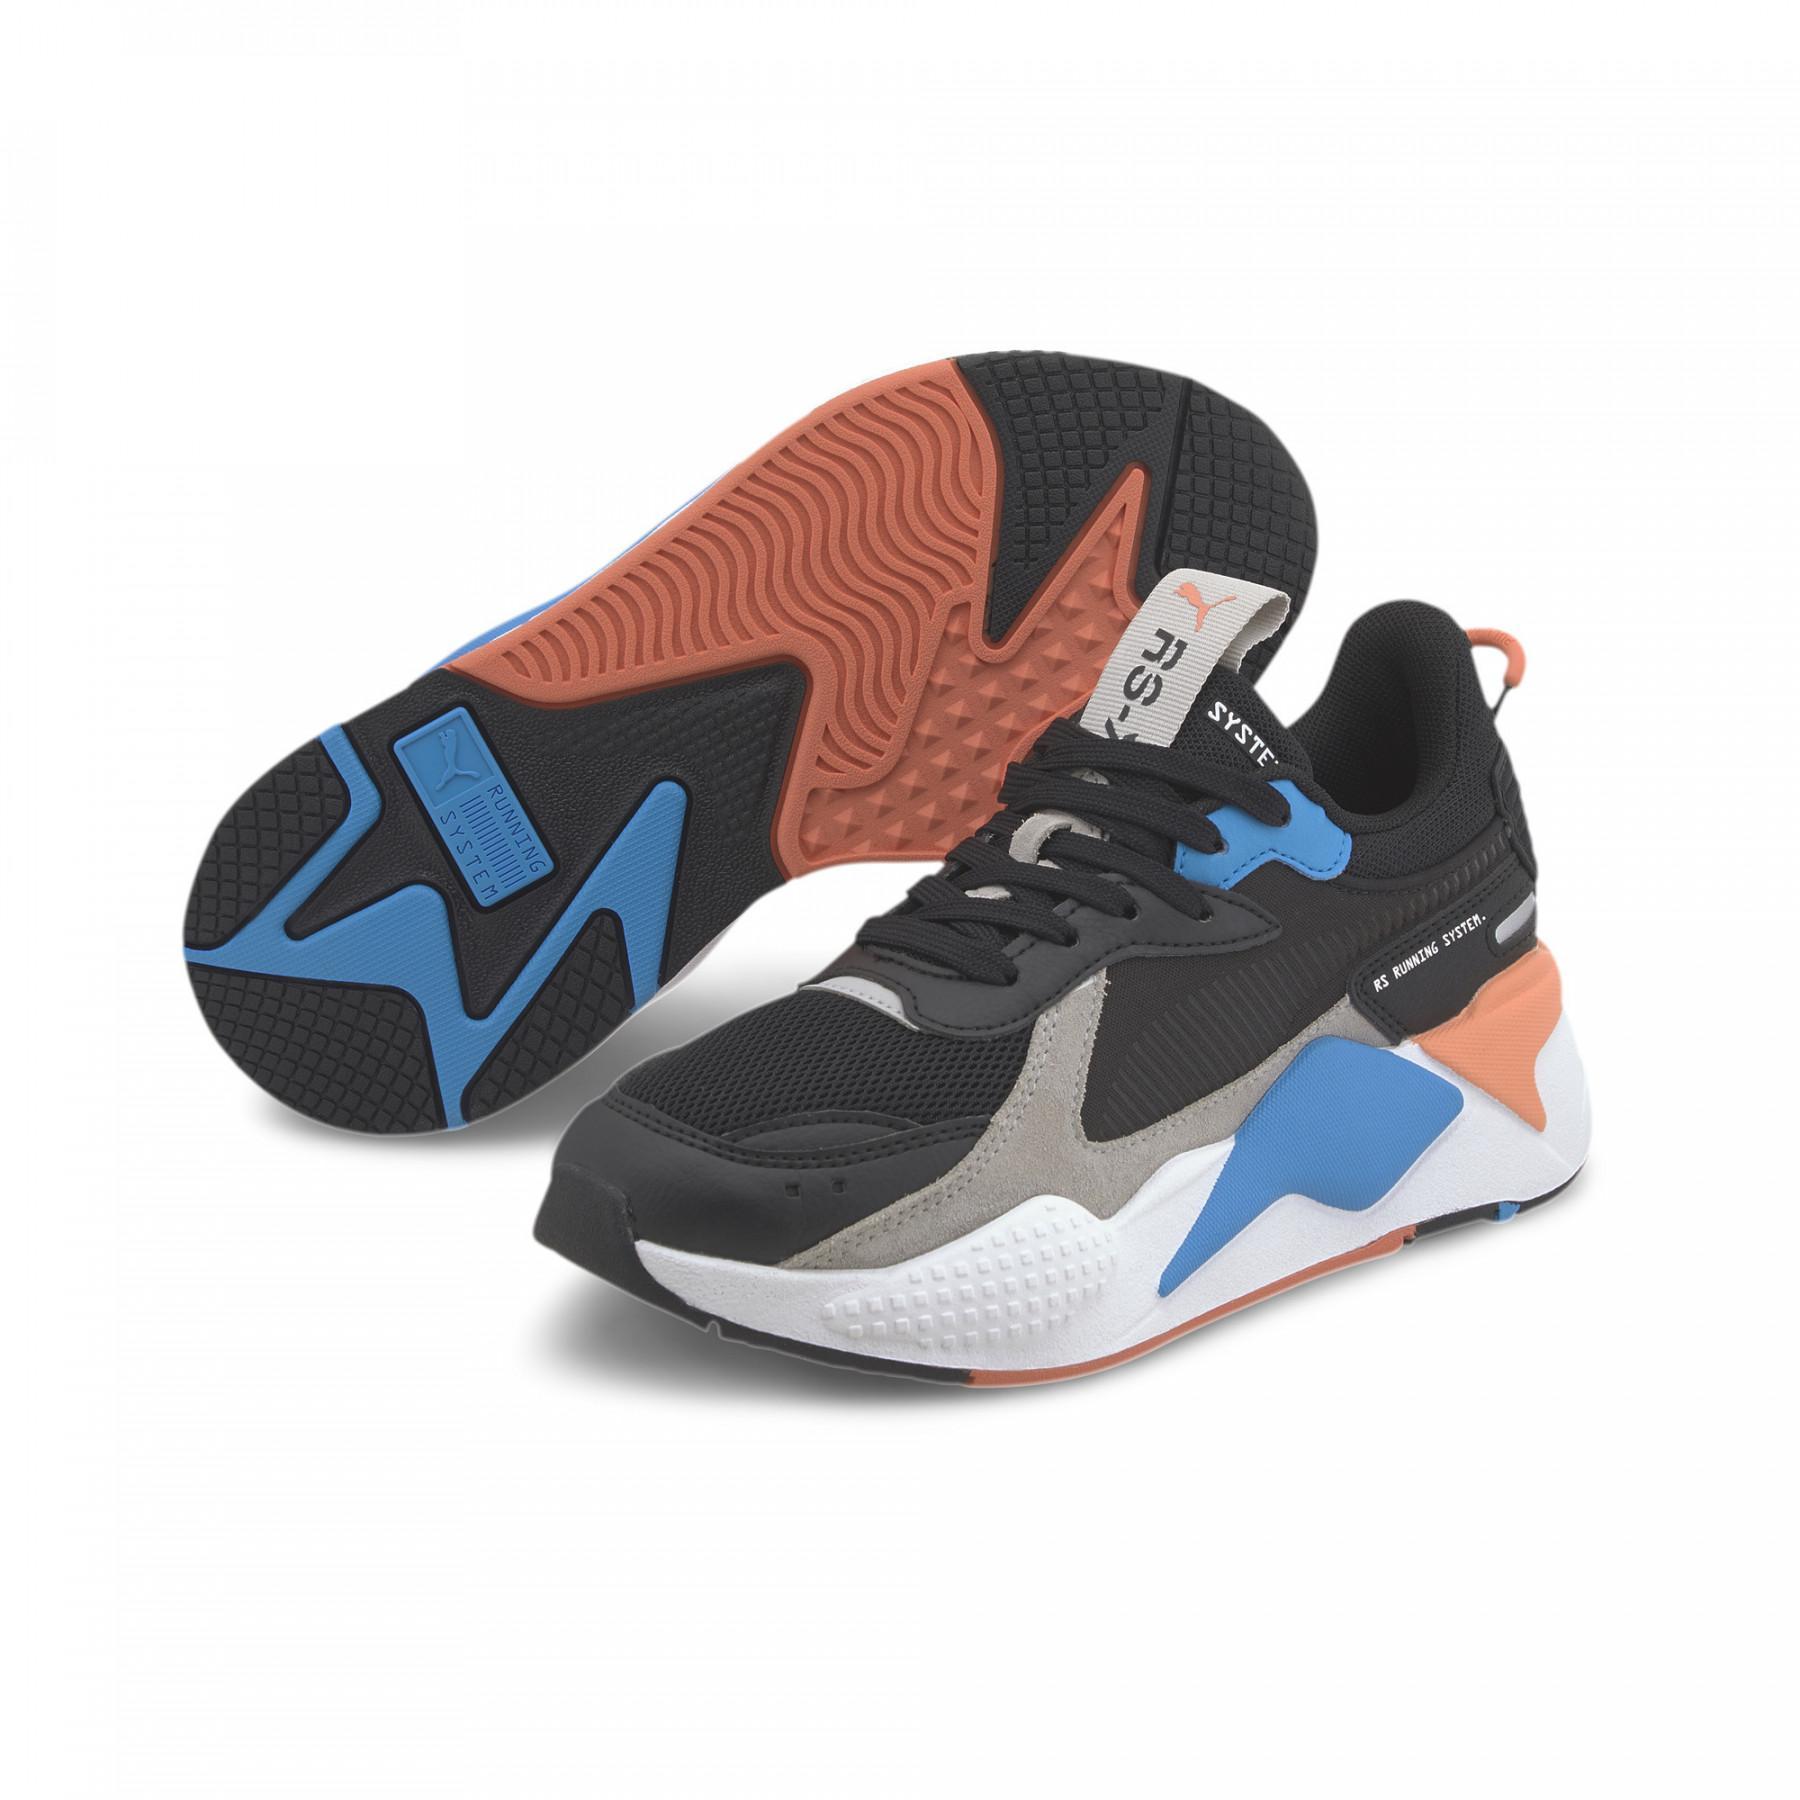 Children's sneakers Puma RS-X Monday